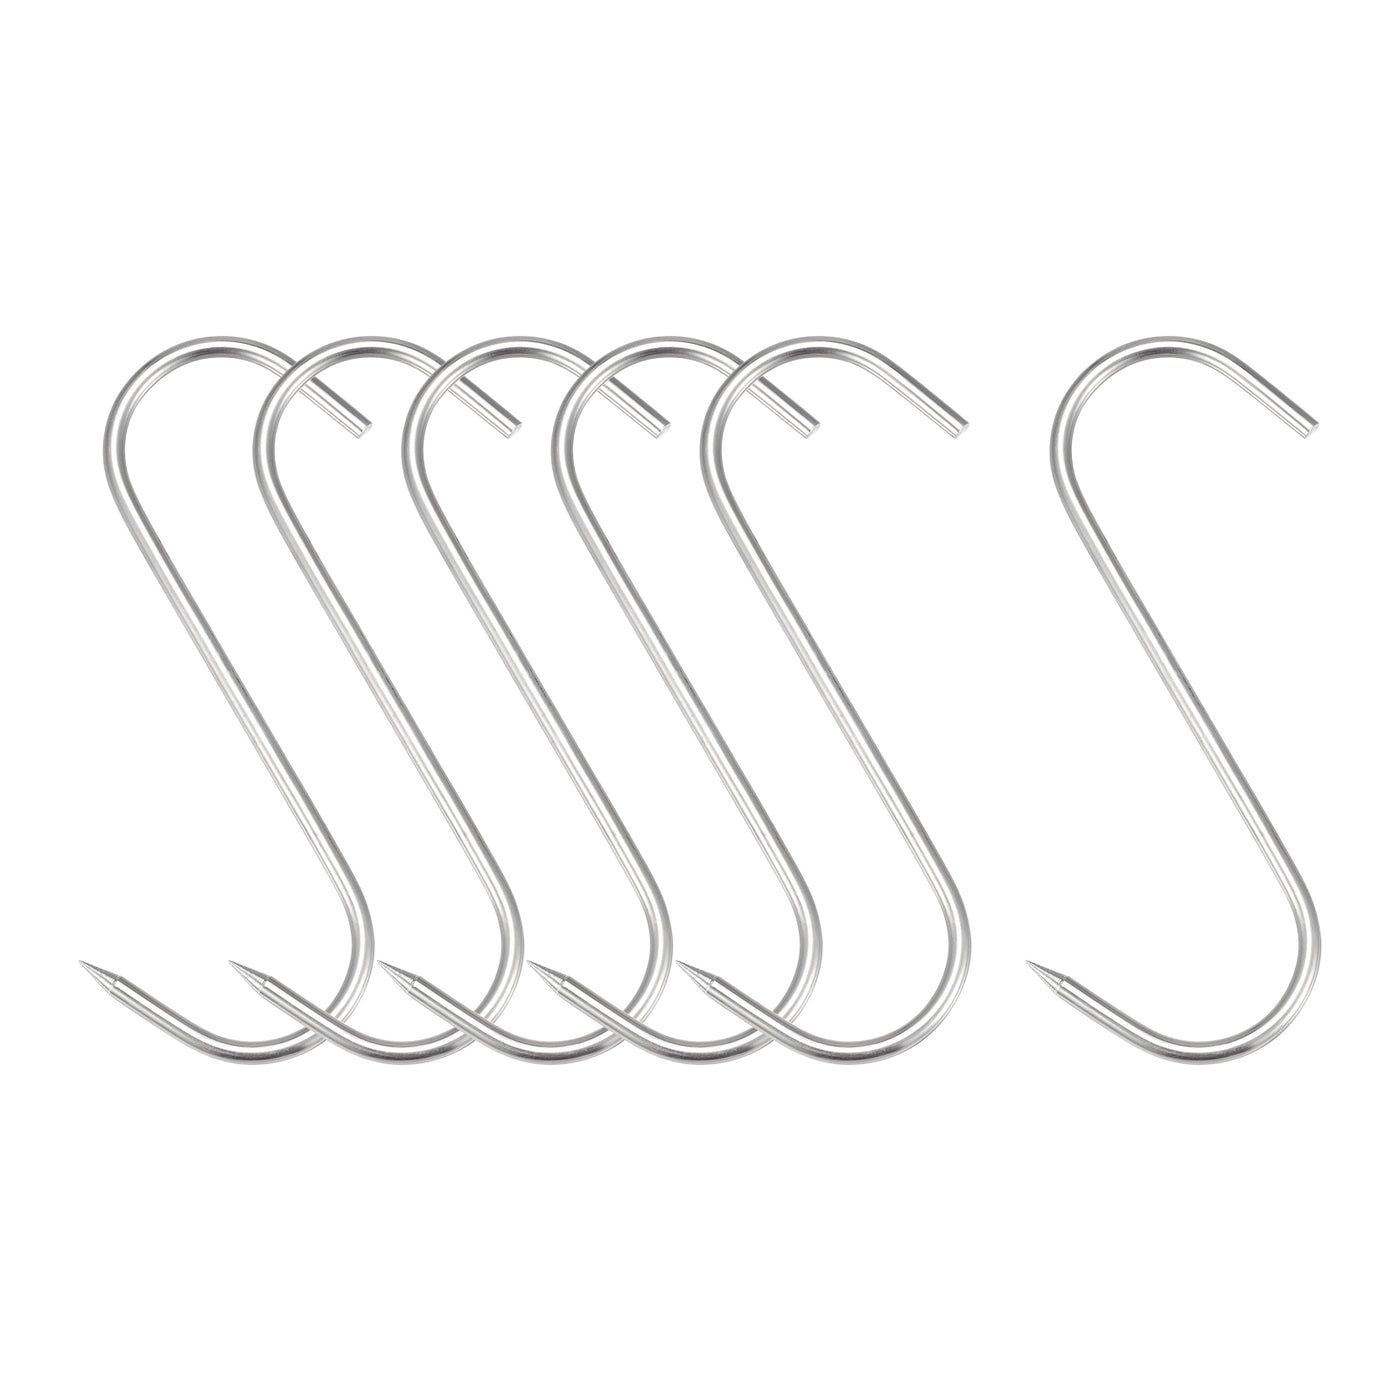 uxcell Uxcell Meat Hooks, Stainless Steel S-Hook, Meat Processing for Chicken Beef Hanging Drying Smoking